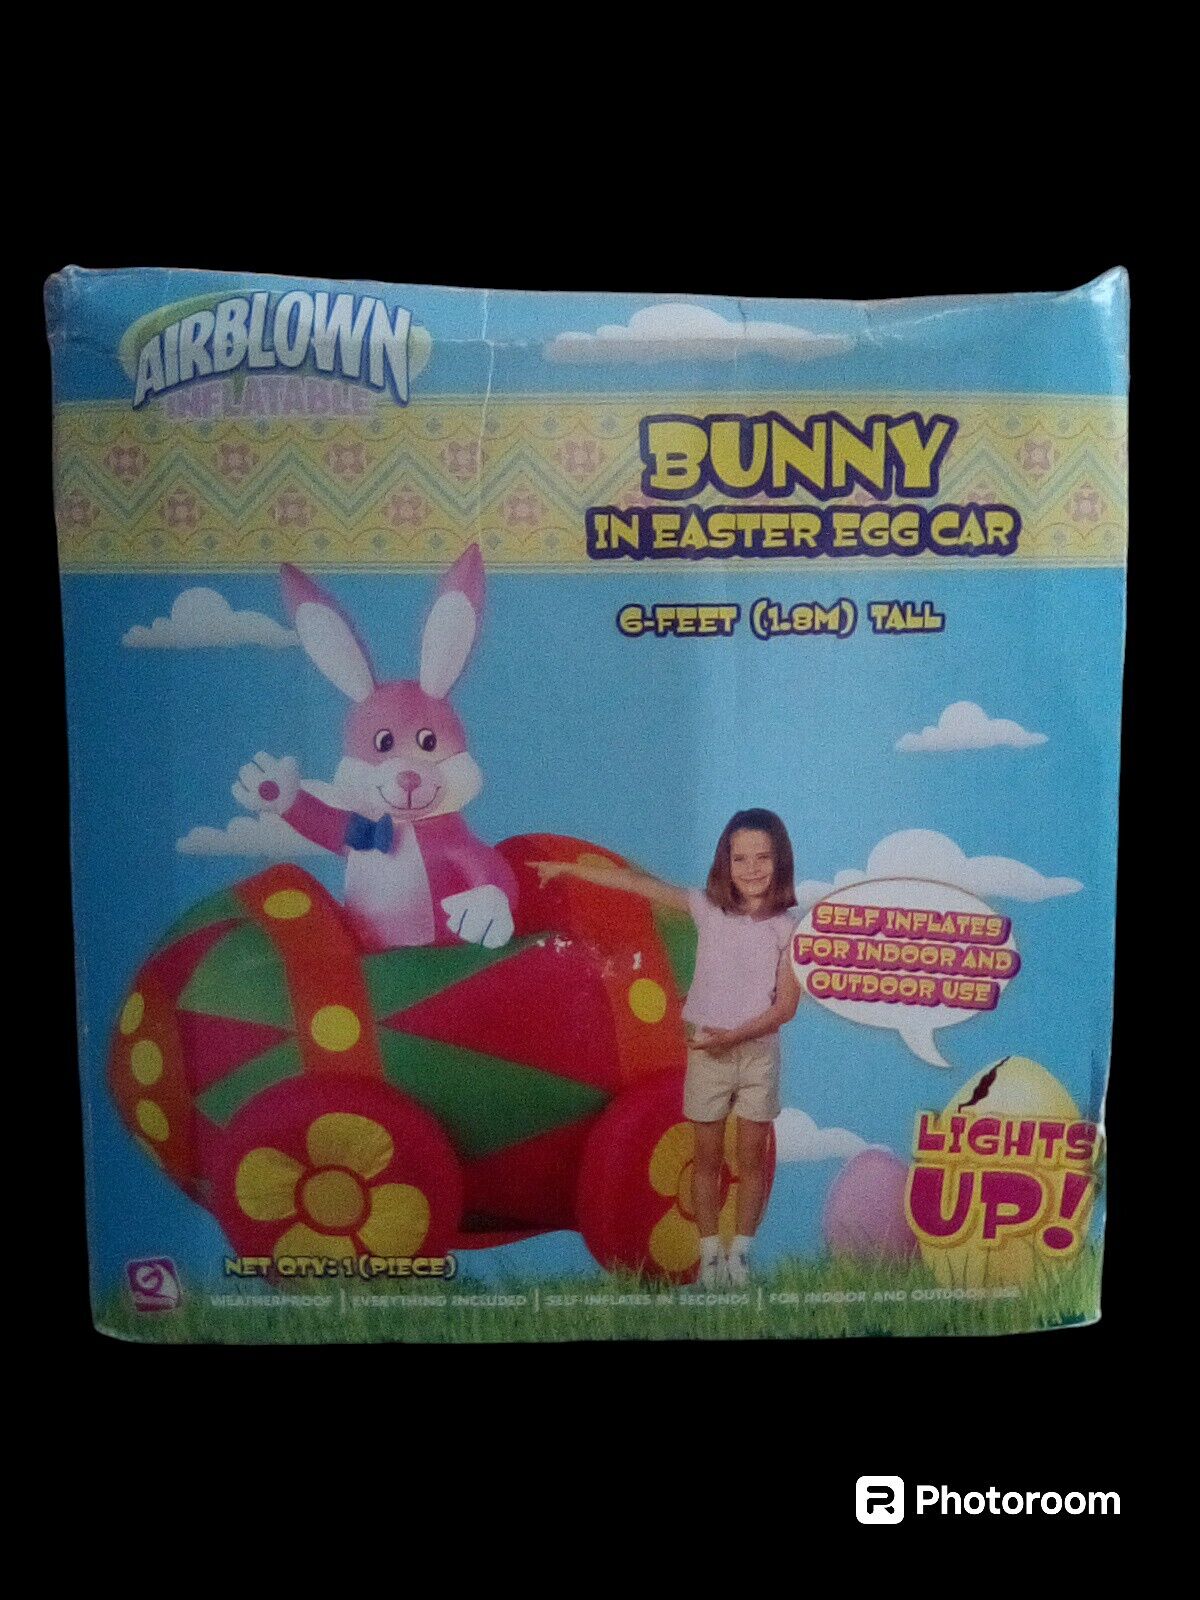 Gemmy 6ft Lighted Bunny Rabbit Easter Egg Car Inflatable Airblown,2006...